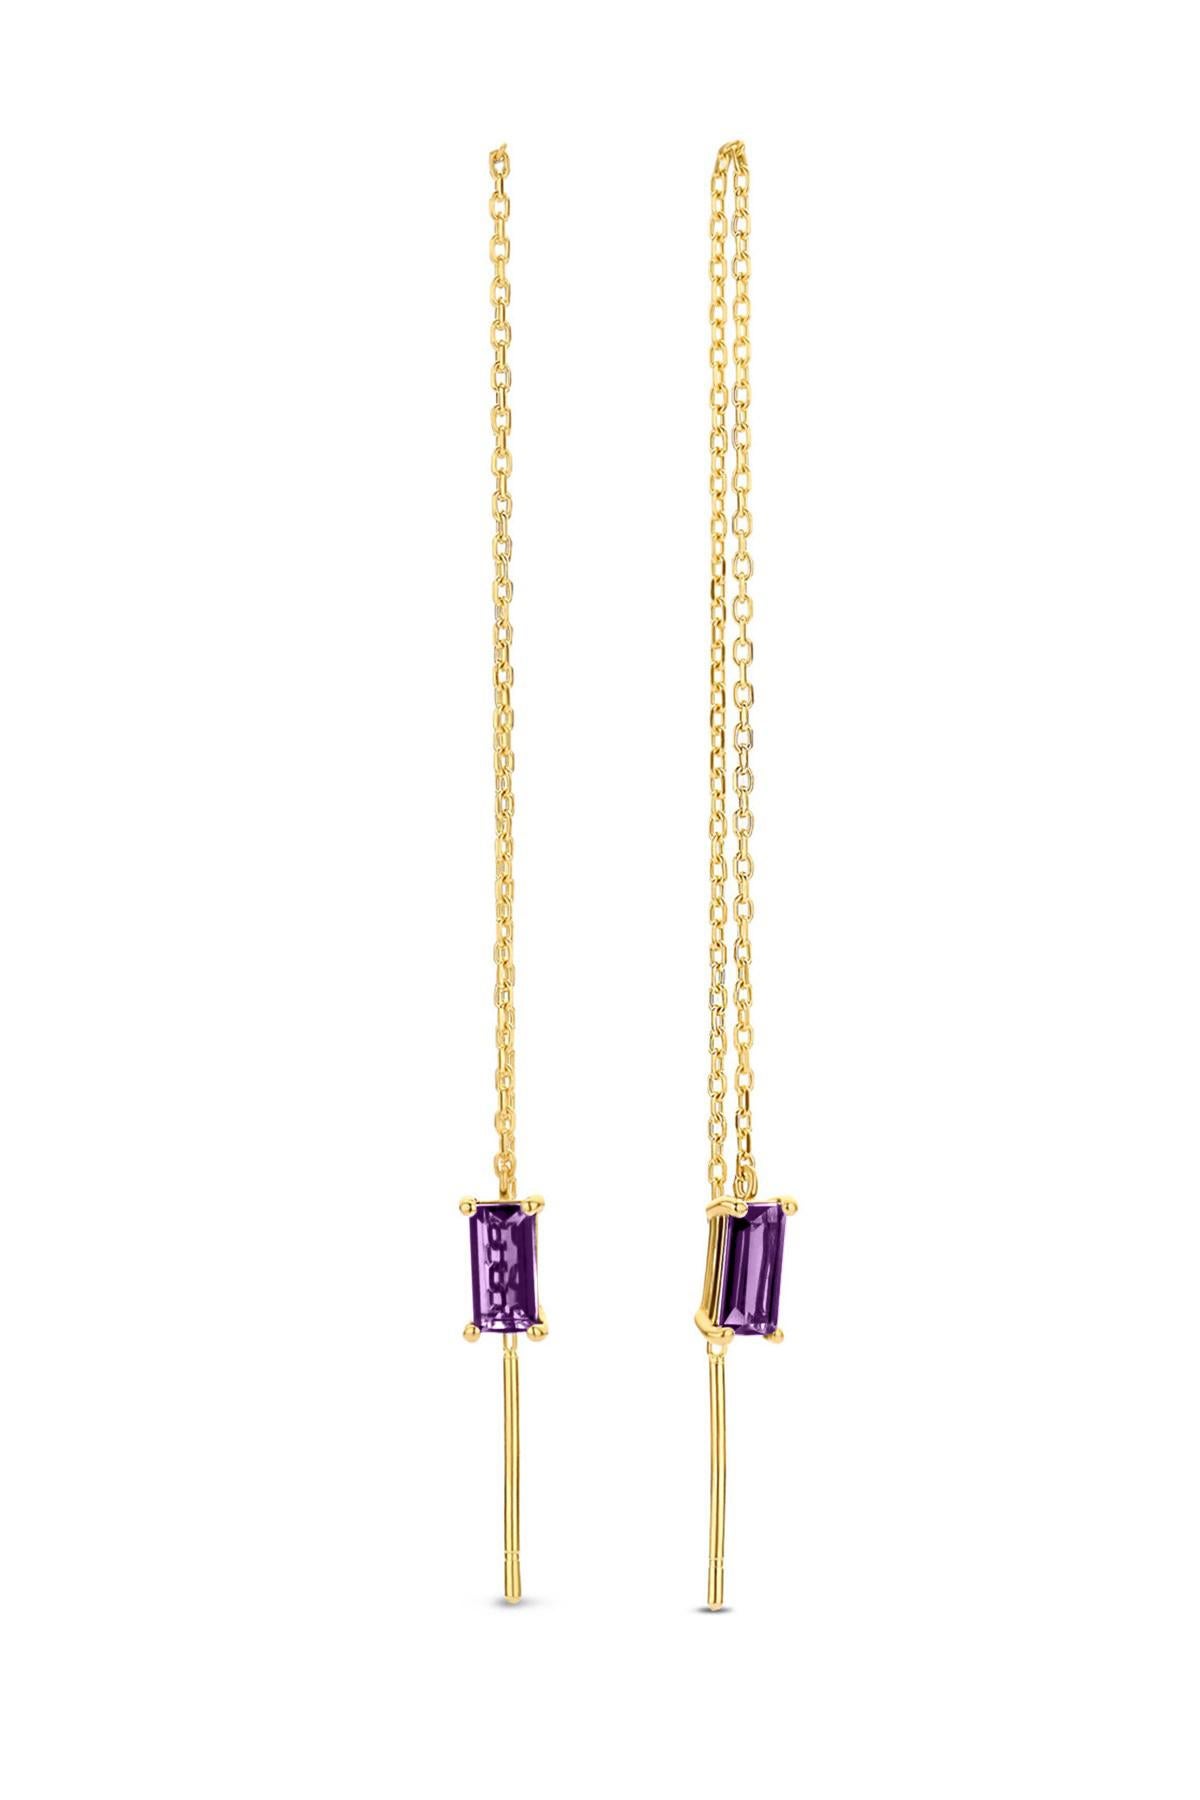 Modern 14k Solid Gold Drop Earrings with amethysts.  Chain Gold Earrings For Sale